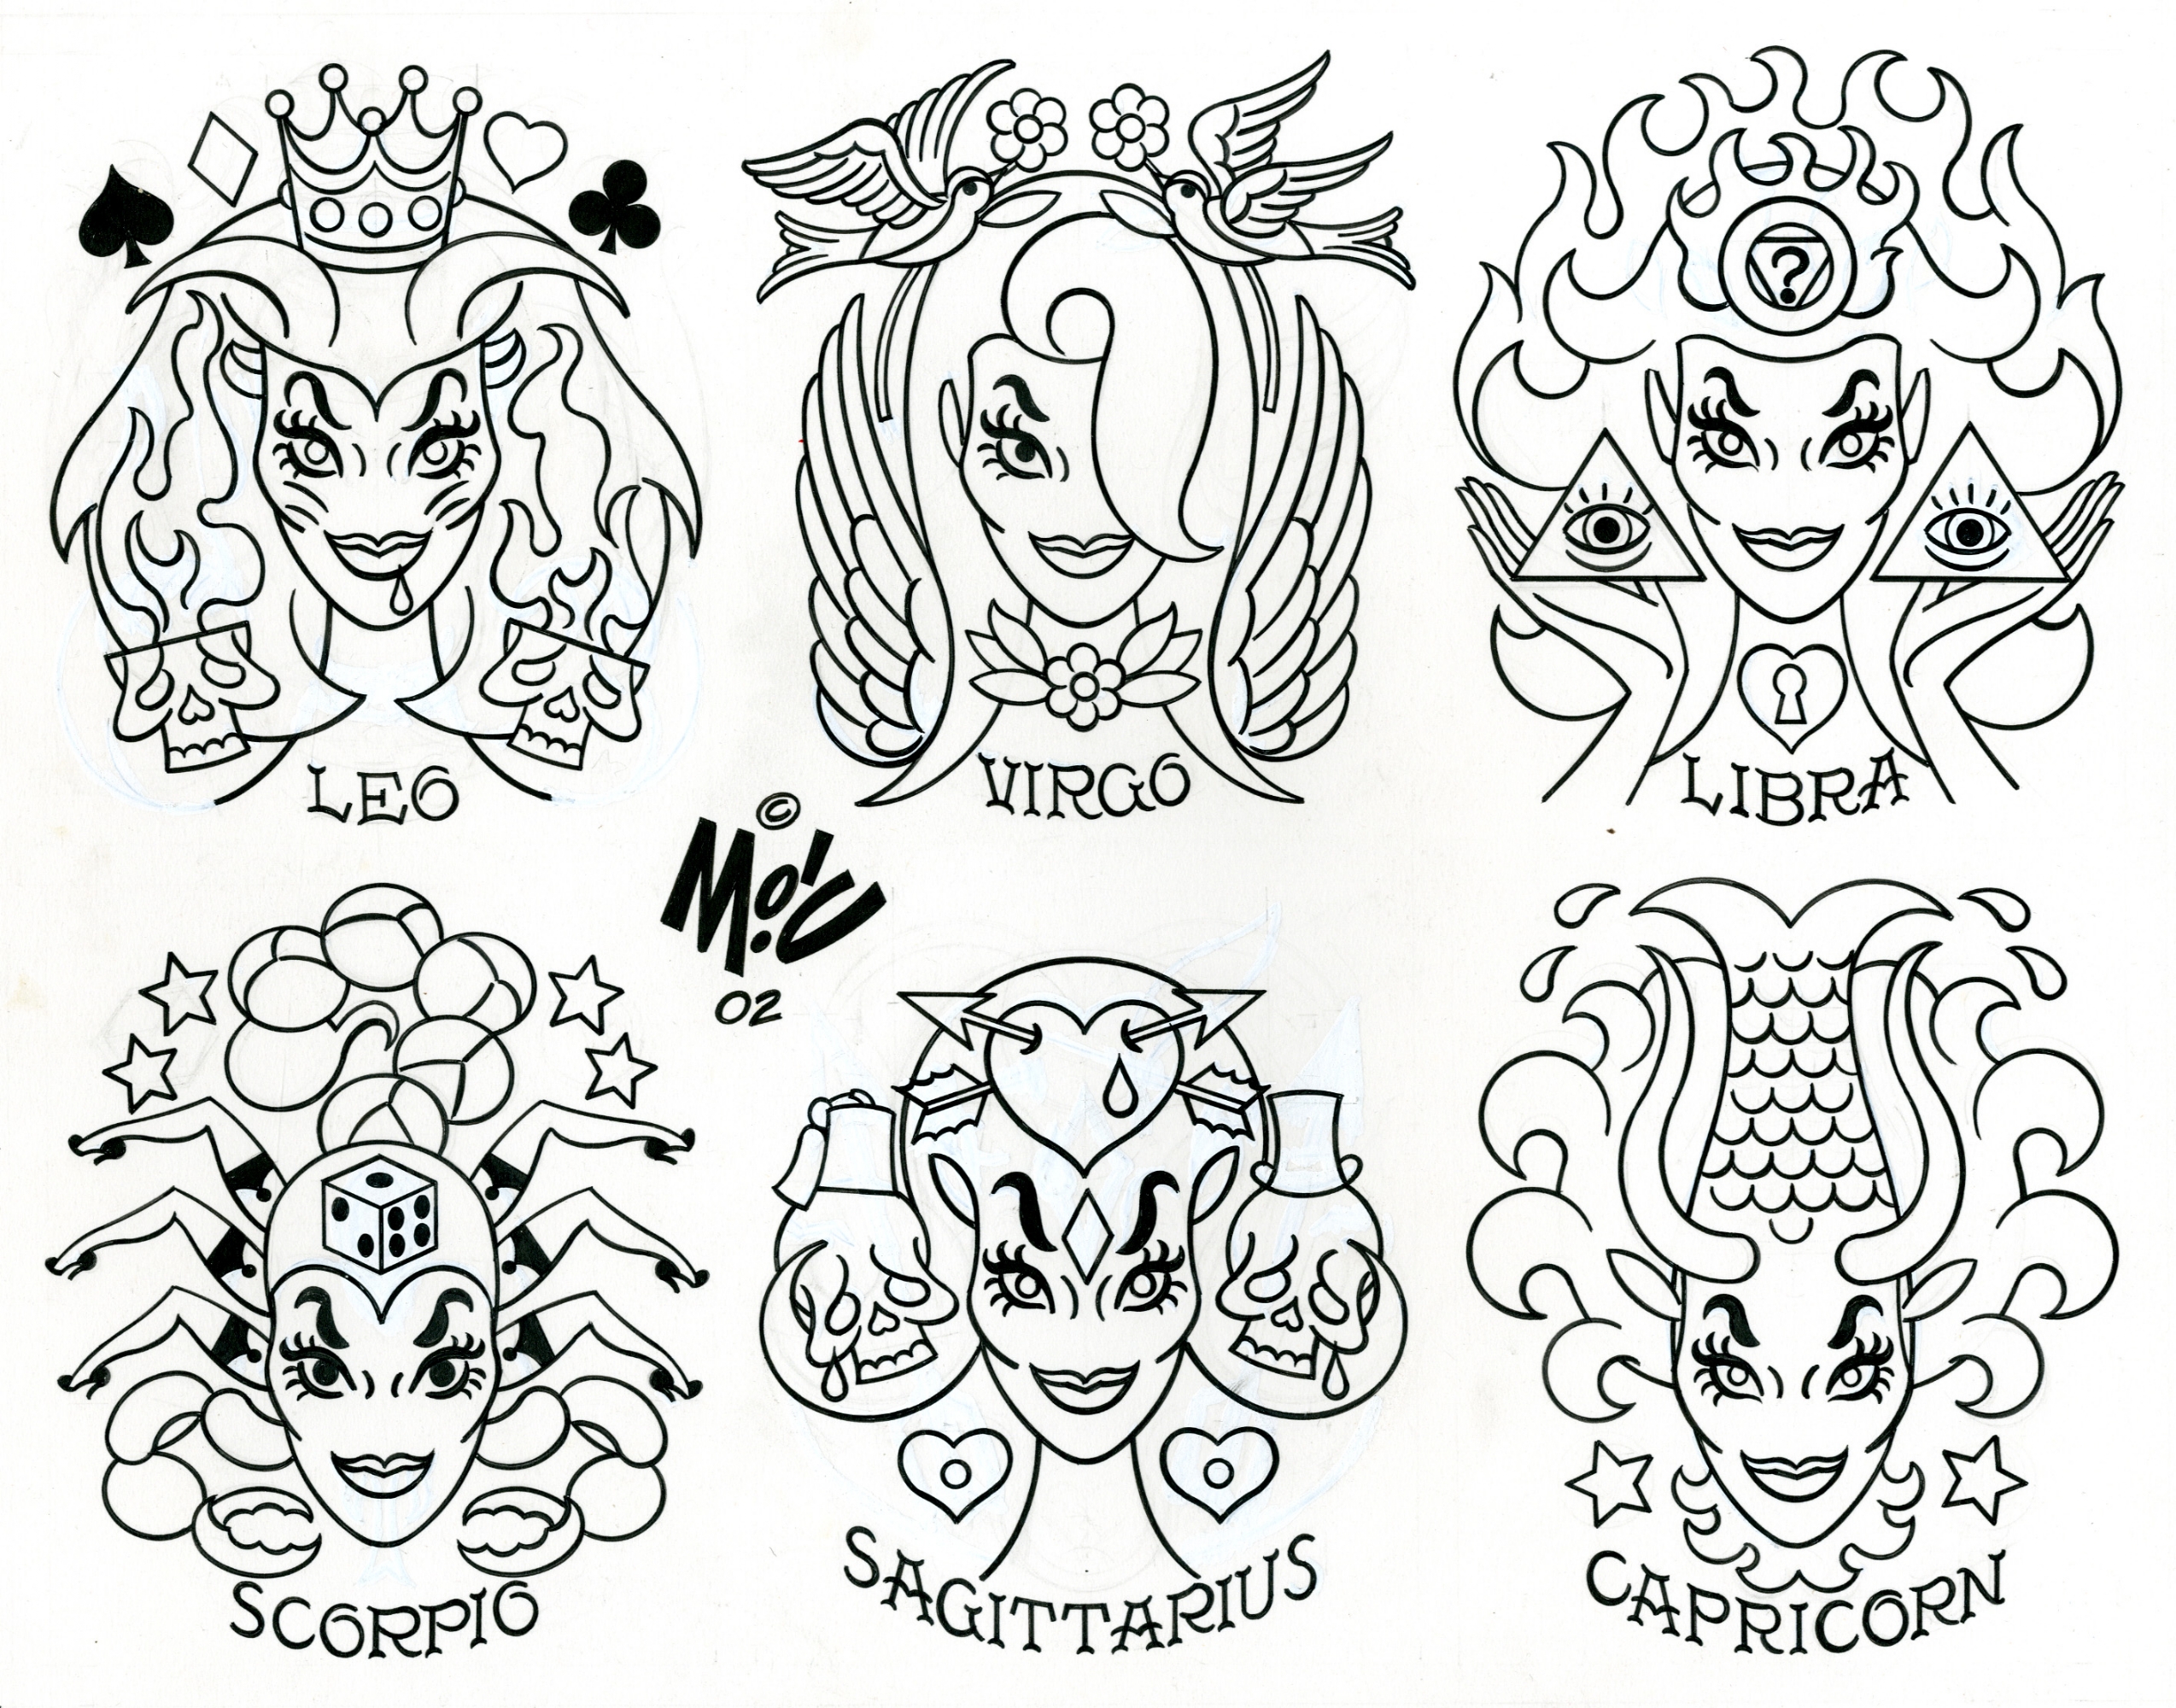 Western & Chinese Zodiac Astrology Tattoos: Meanings & Design Ideas -  TatRing